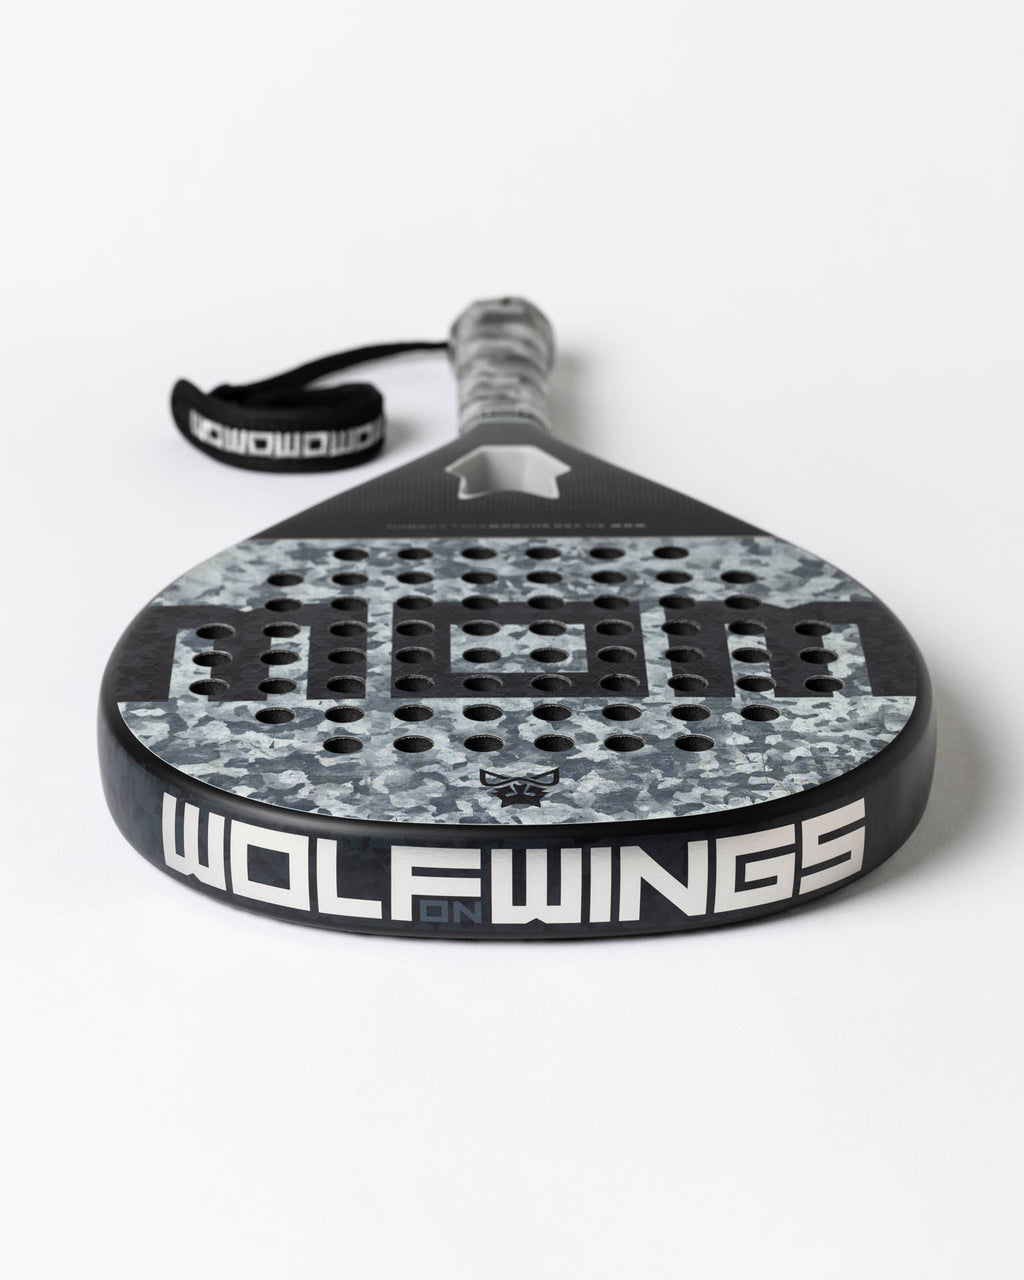 Pala de pádel negra y gris WOW Shade Touch - Full Carbon 3K – WOLF ON WINGS